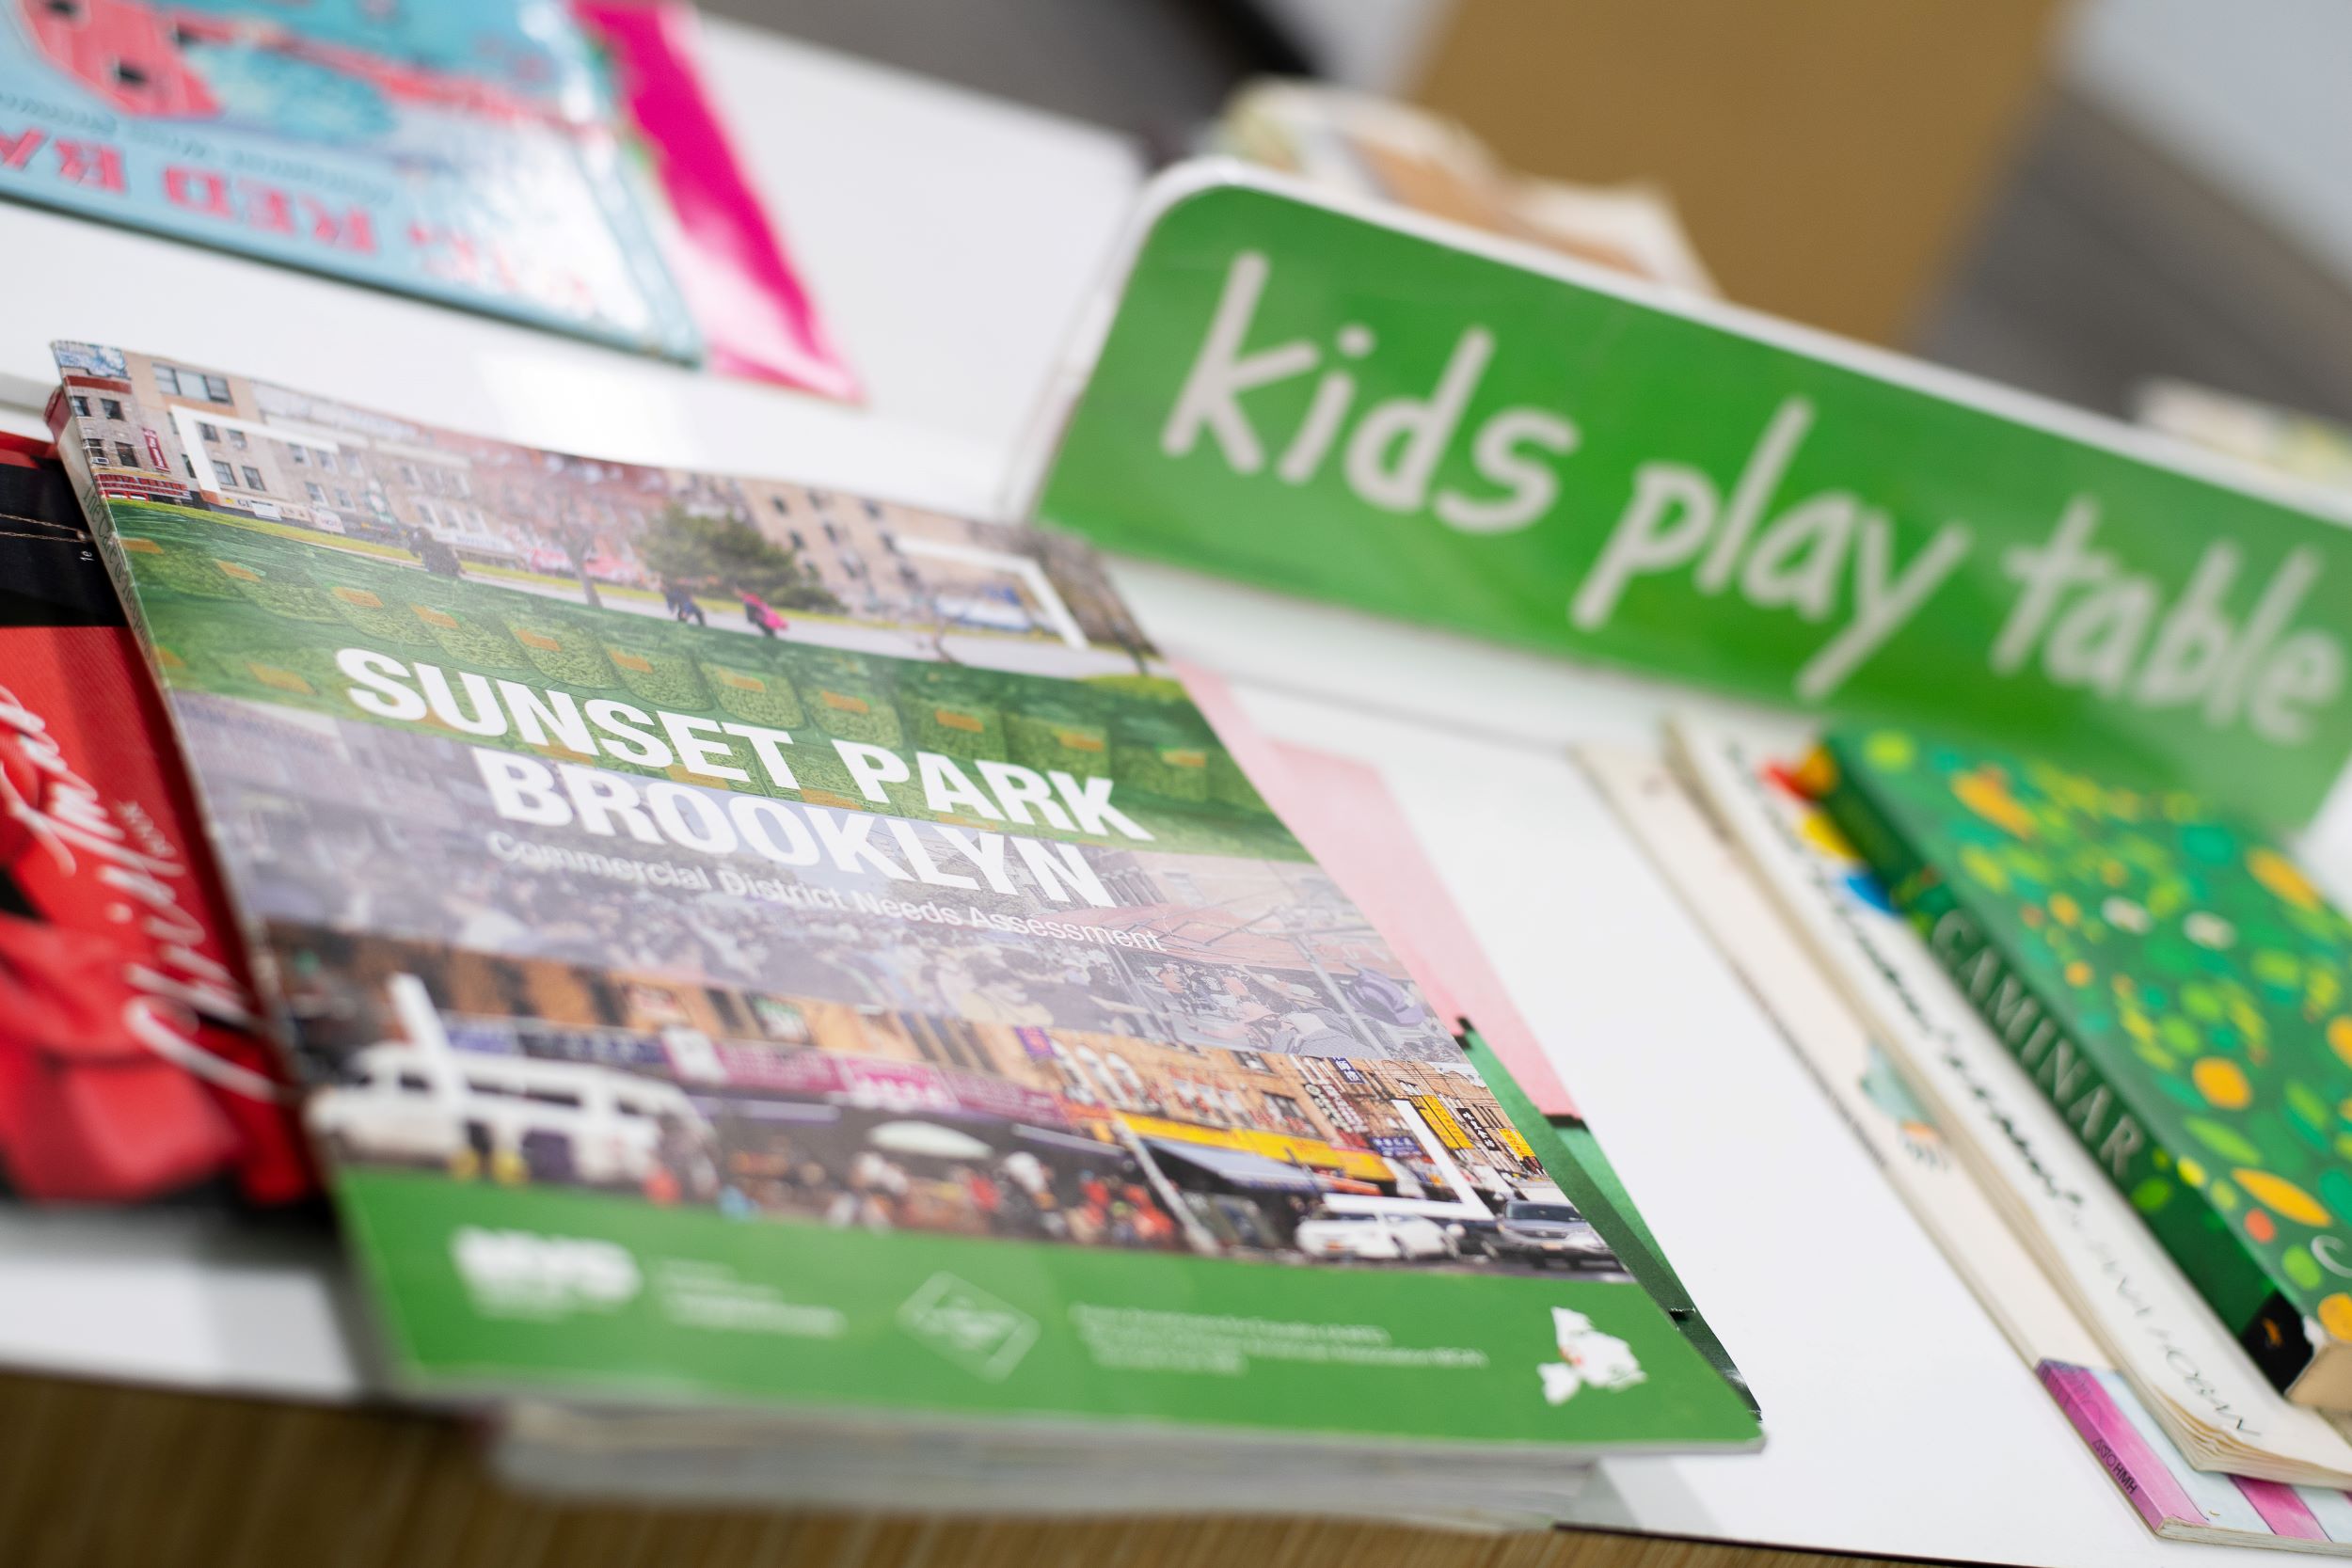 Close-up view of a book titled "sunset park brooklyn" on a table with other books, and a green sign saying "kids play table" in the background, focused on the book cover.